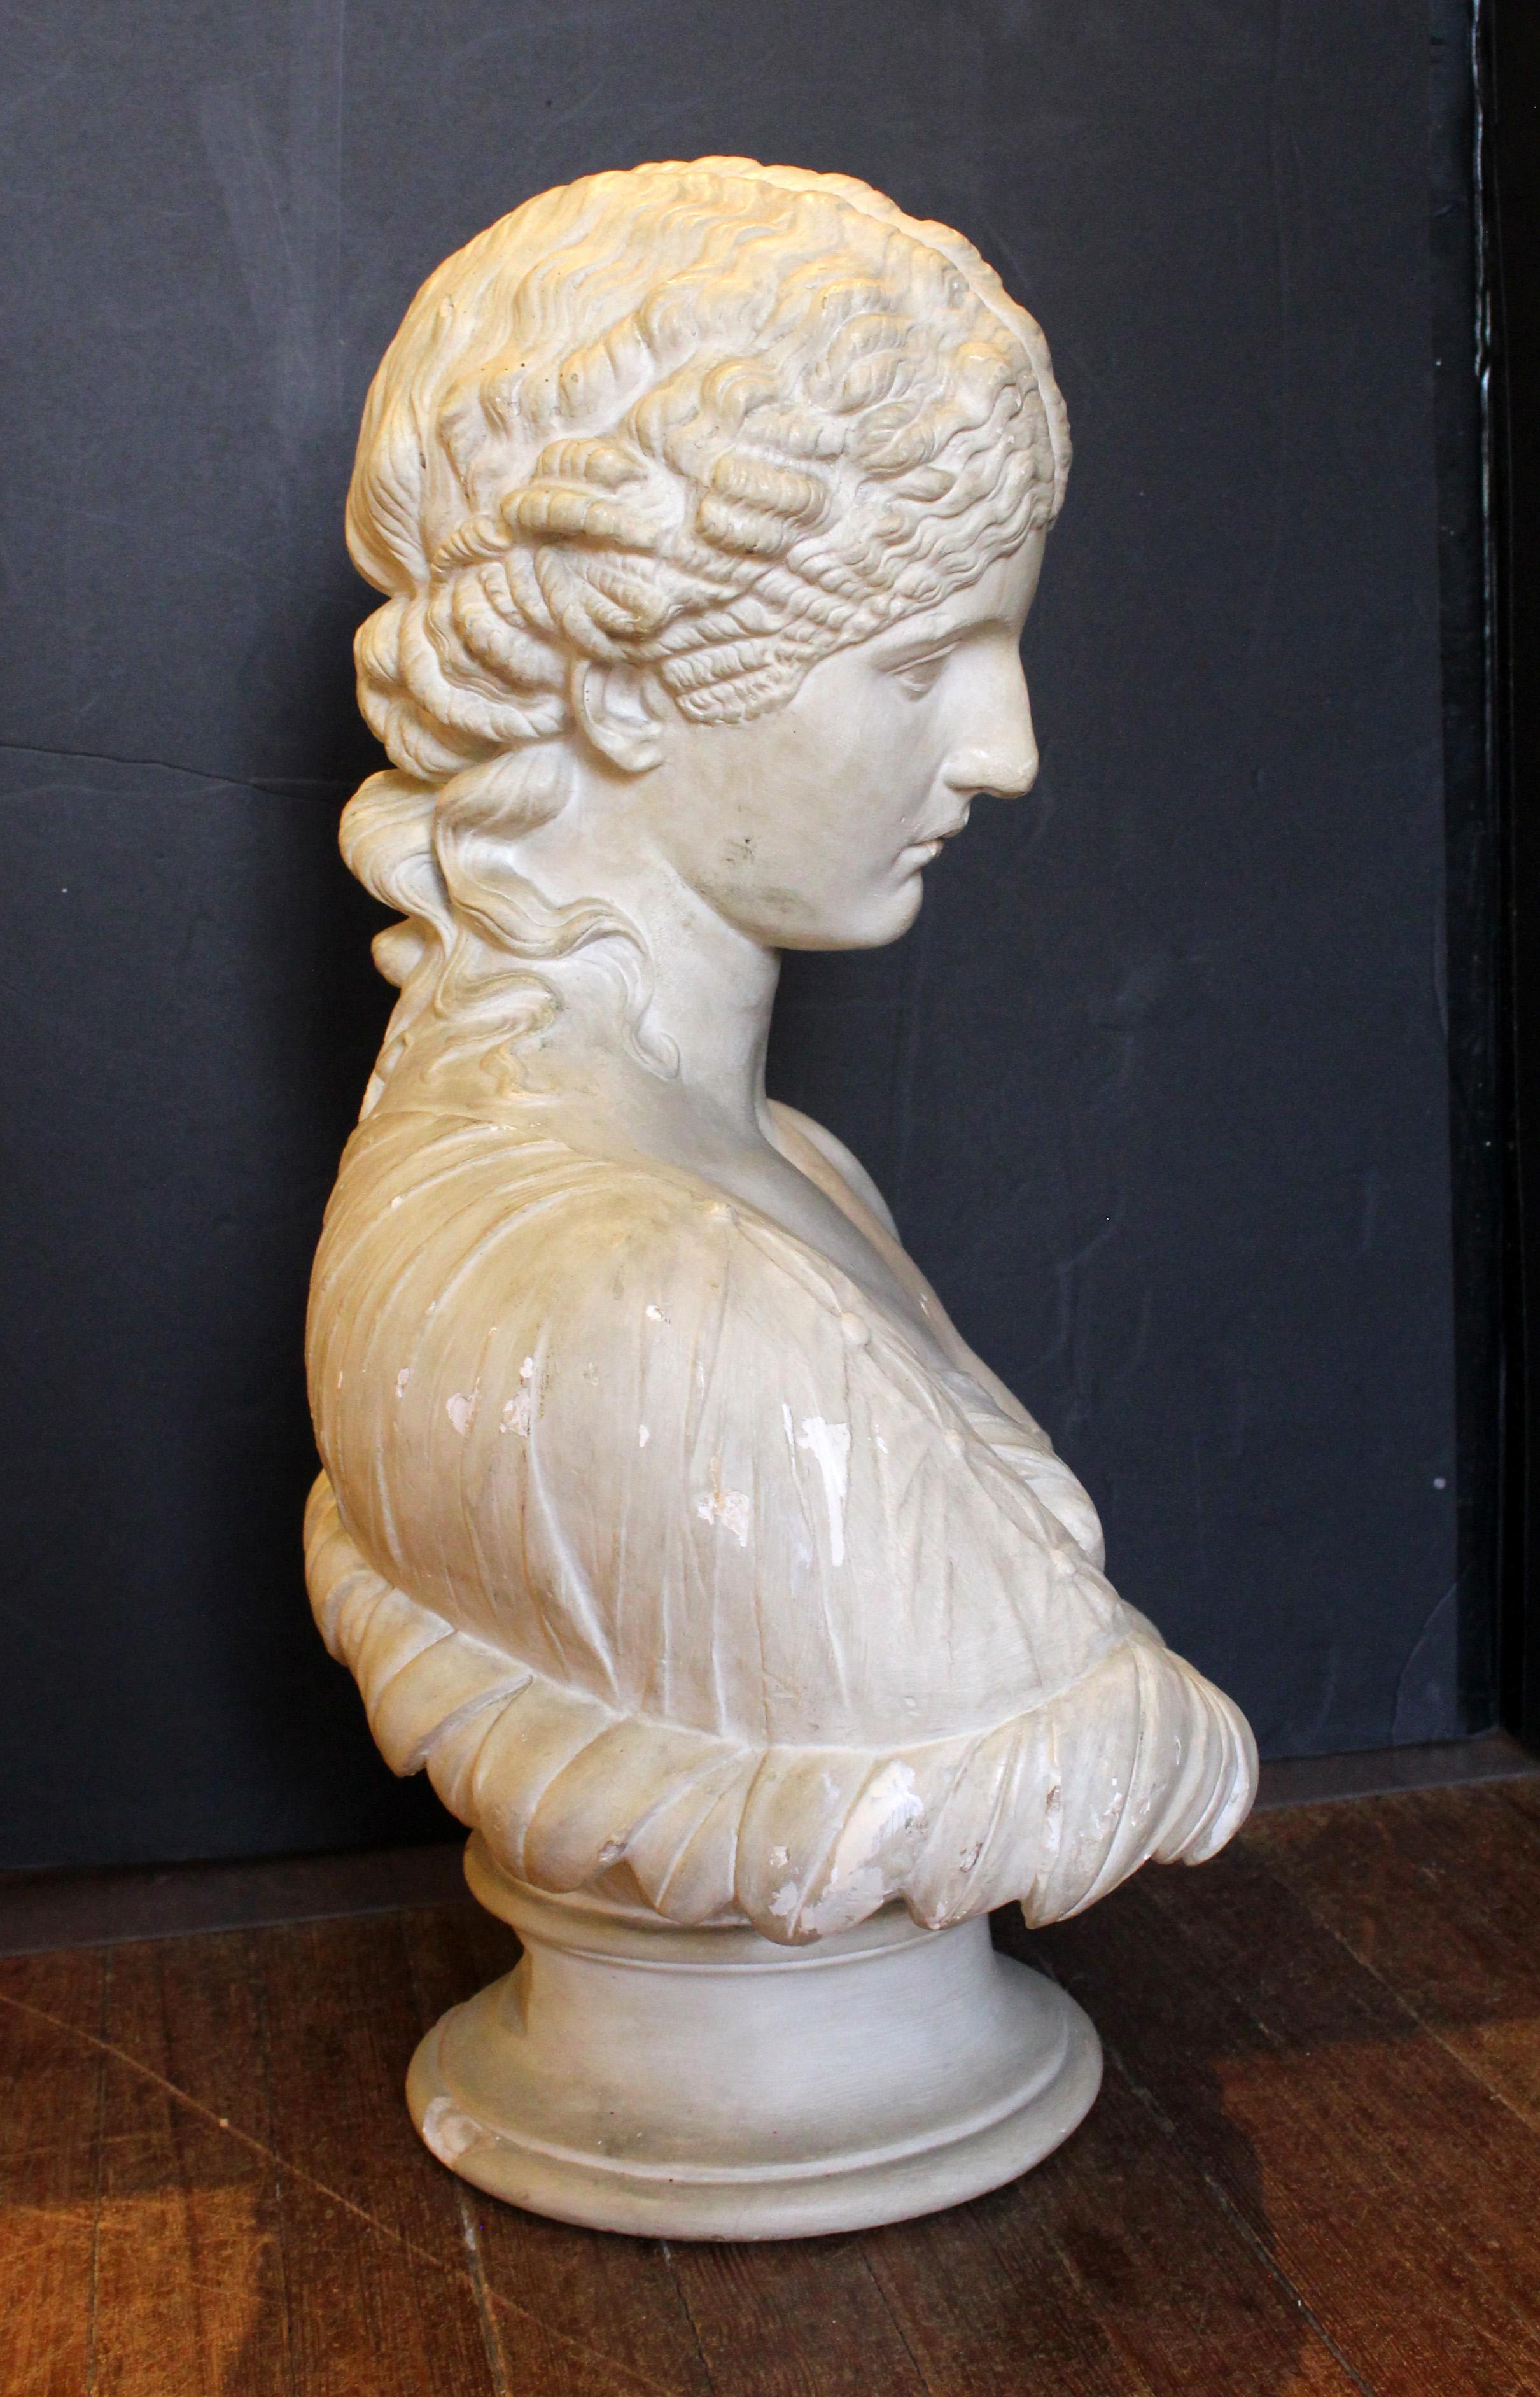 Plaster faux marble bust of Antonia, made by D. Brucciani & Co. London, late 19th century. A woman emerging from a calyx of leaf came to represent the nymph Clytie. A copy of the marble one from The British Museum from Rome dating to 40-50 CE.